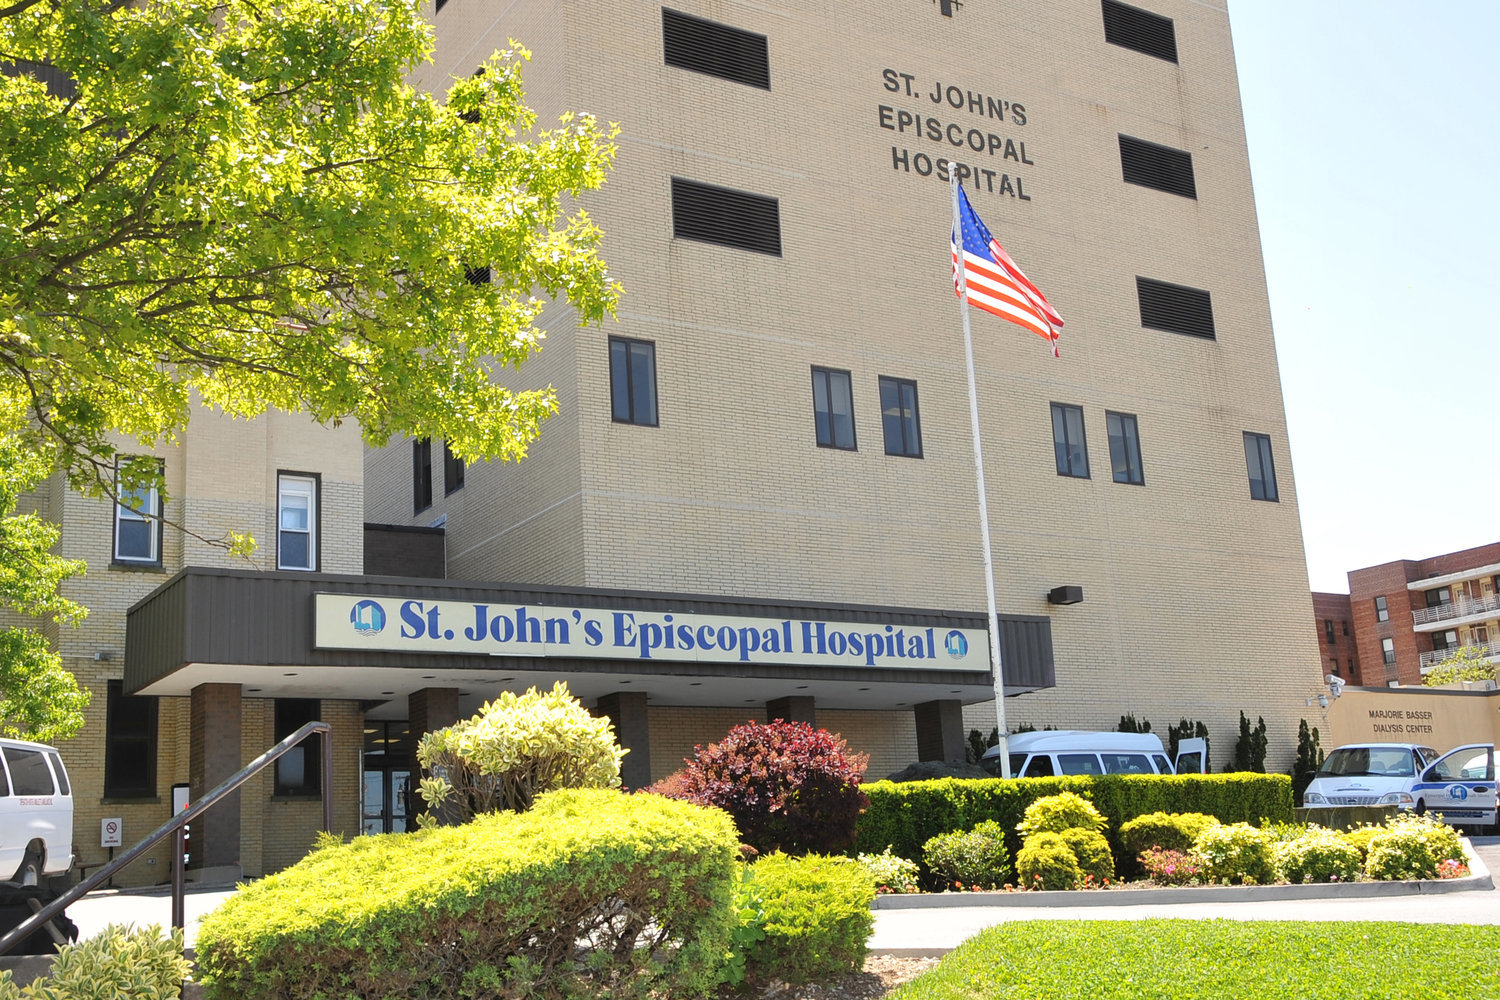 St. John's Hospital in Far Rockaway is not allowing visitors, screening people who come to the hospital and has staff prepared to handle the coronavirus outbreak.